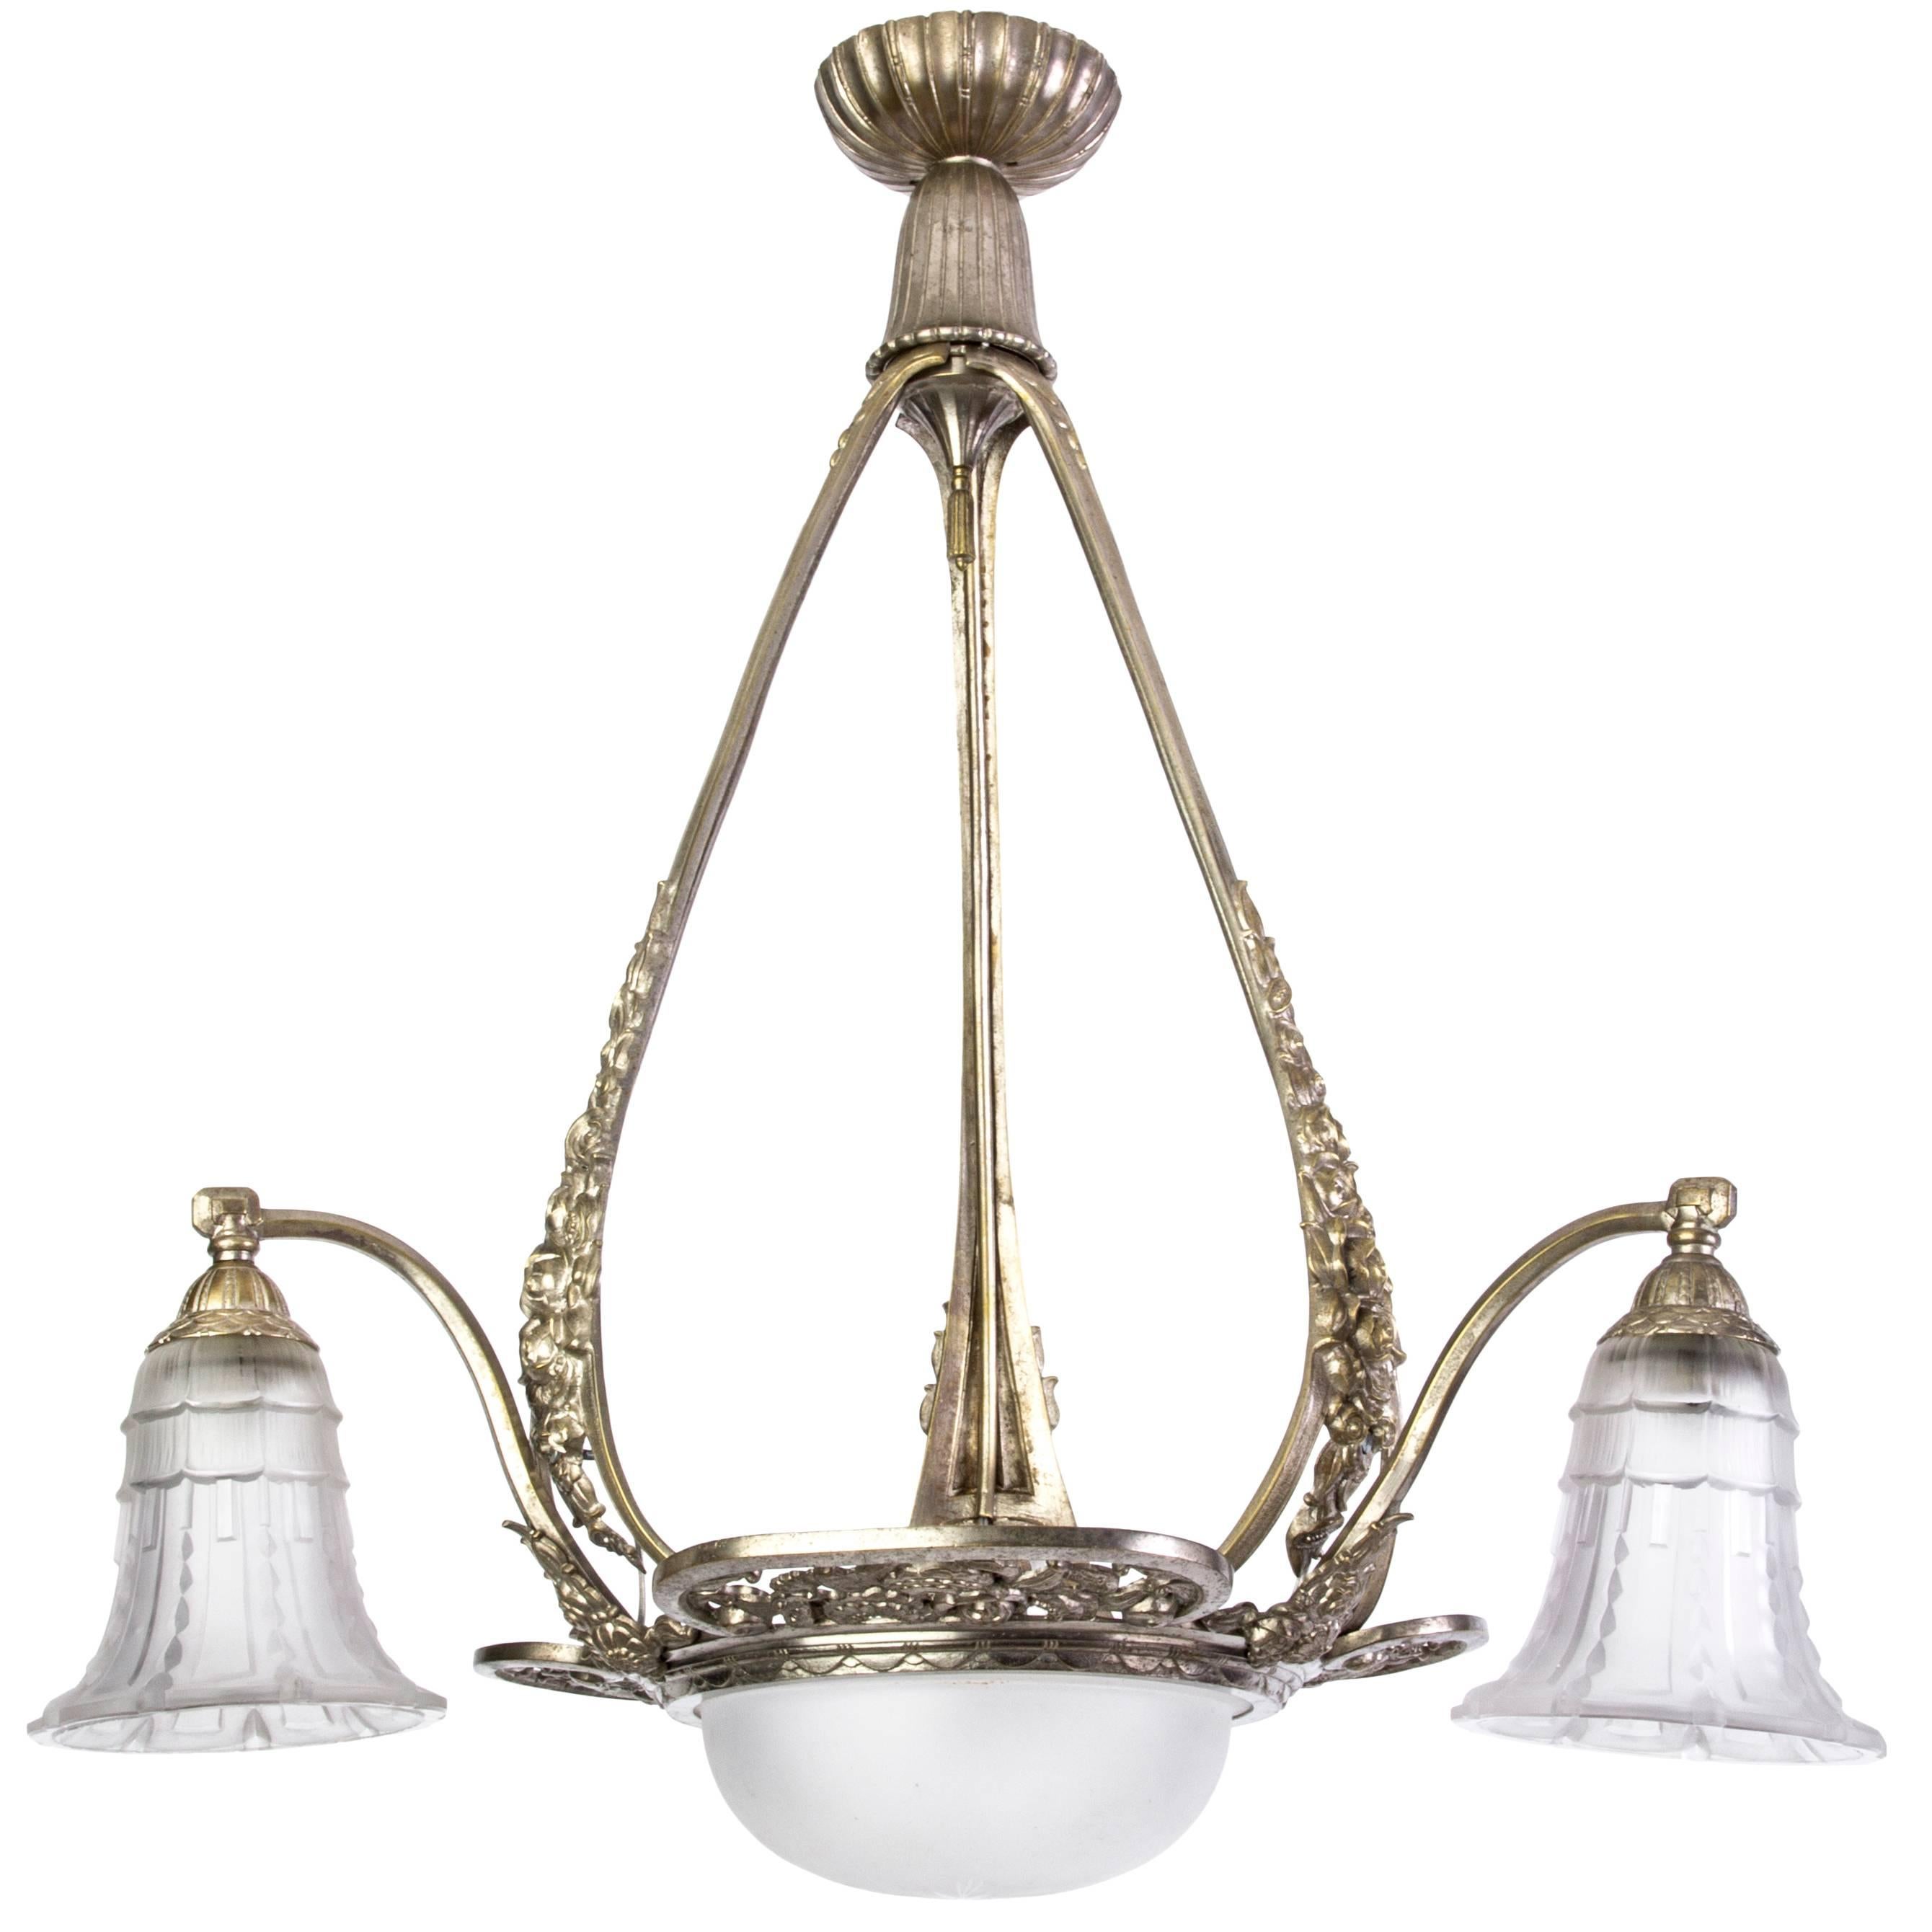 Stunning Early French Art Deco Chandelier